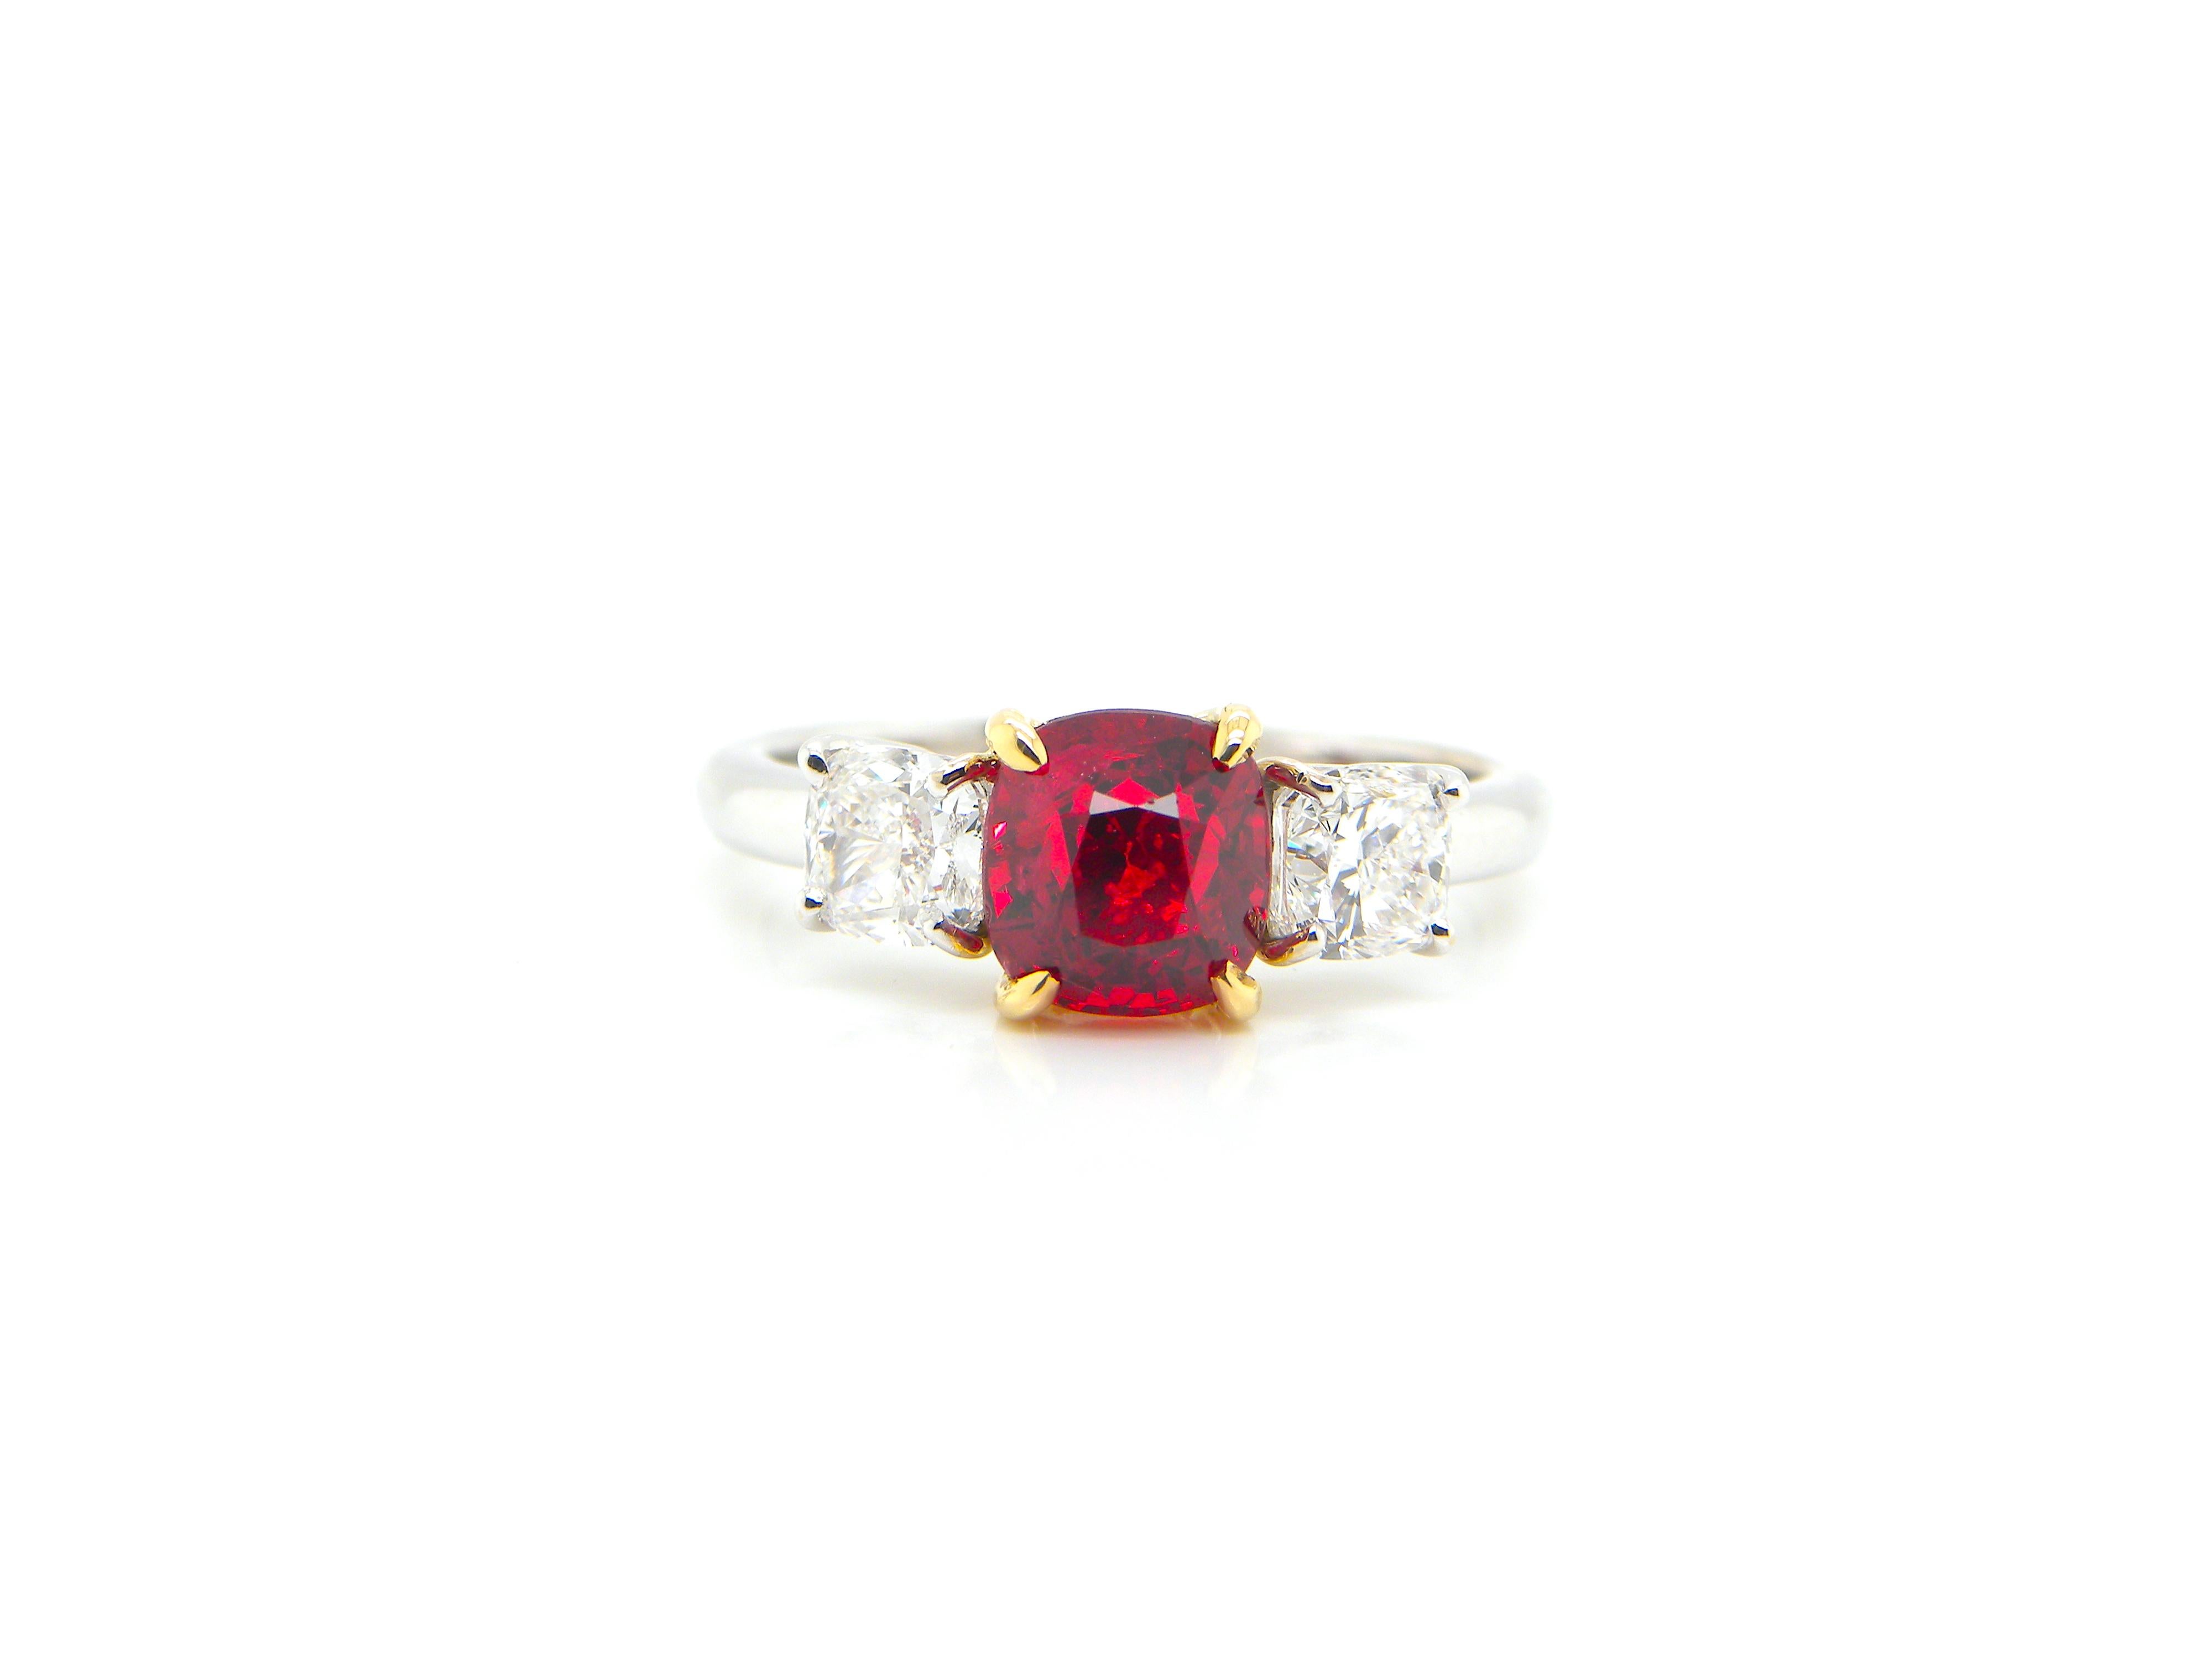 2.02 Carat GRS Certified Burma No Heat Vivid Red Spinel and White Diamond Ring:

A stunning ring, it features a beautiful and rare GRS certified cushion-cut Burmese unheated vivid red spinel weighing 2.02 carat flanked by two white cushion-cut